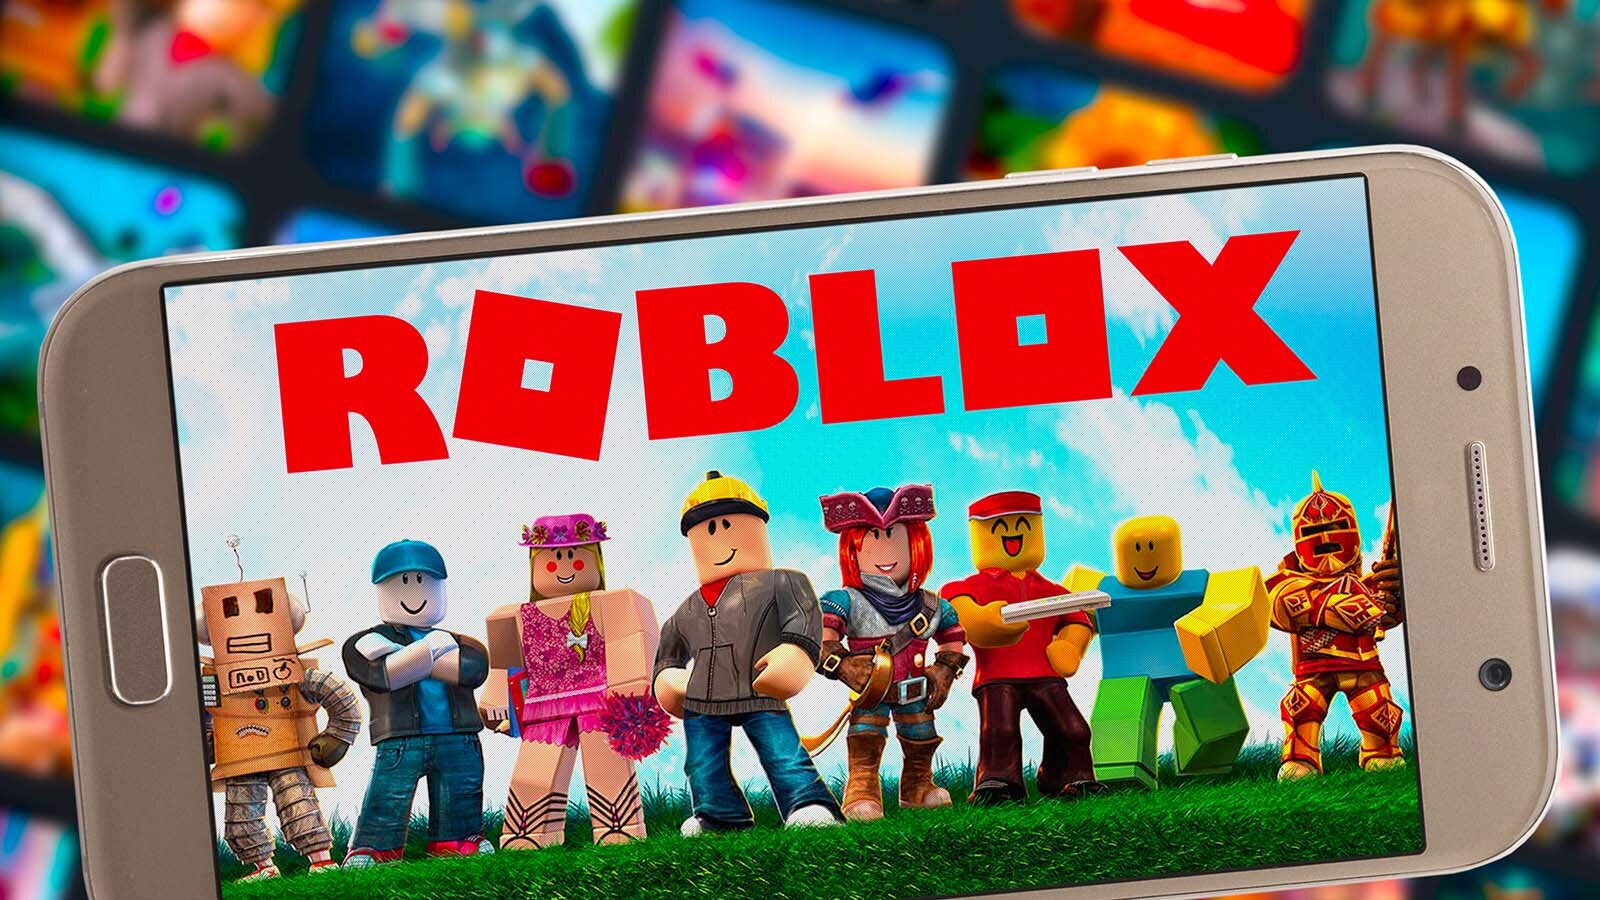 Roblox on playstation could be 100x times better : r/roblox